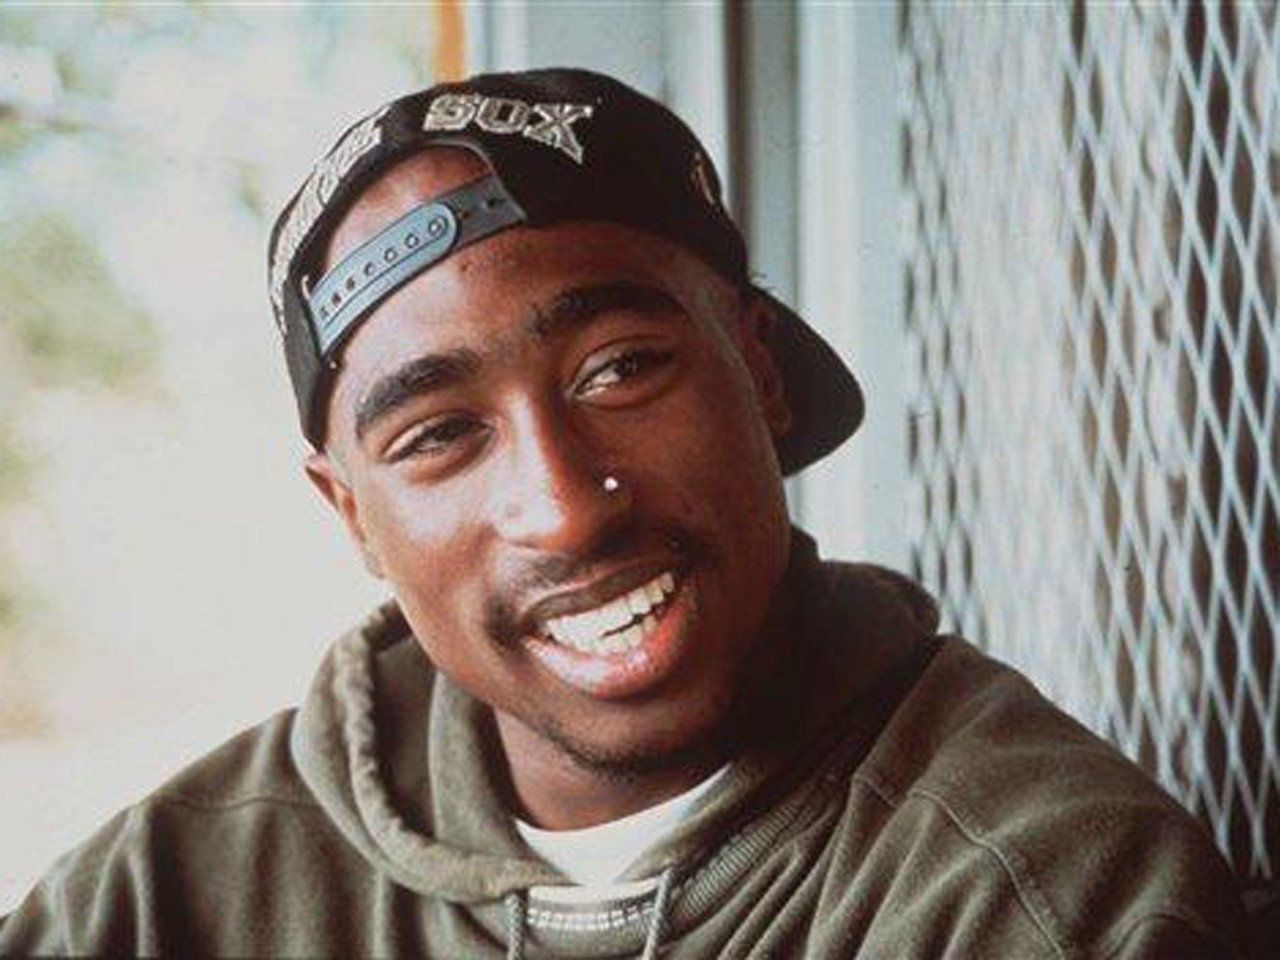 Report: Las Vegas Police Make An Arrest In The 1996 Slaying Of Tupac Shakur